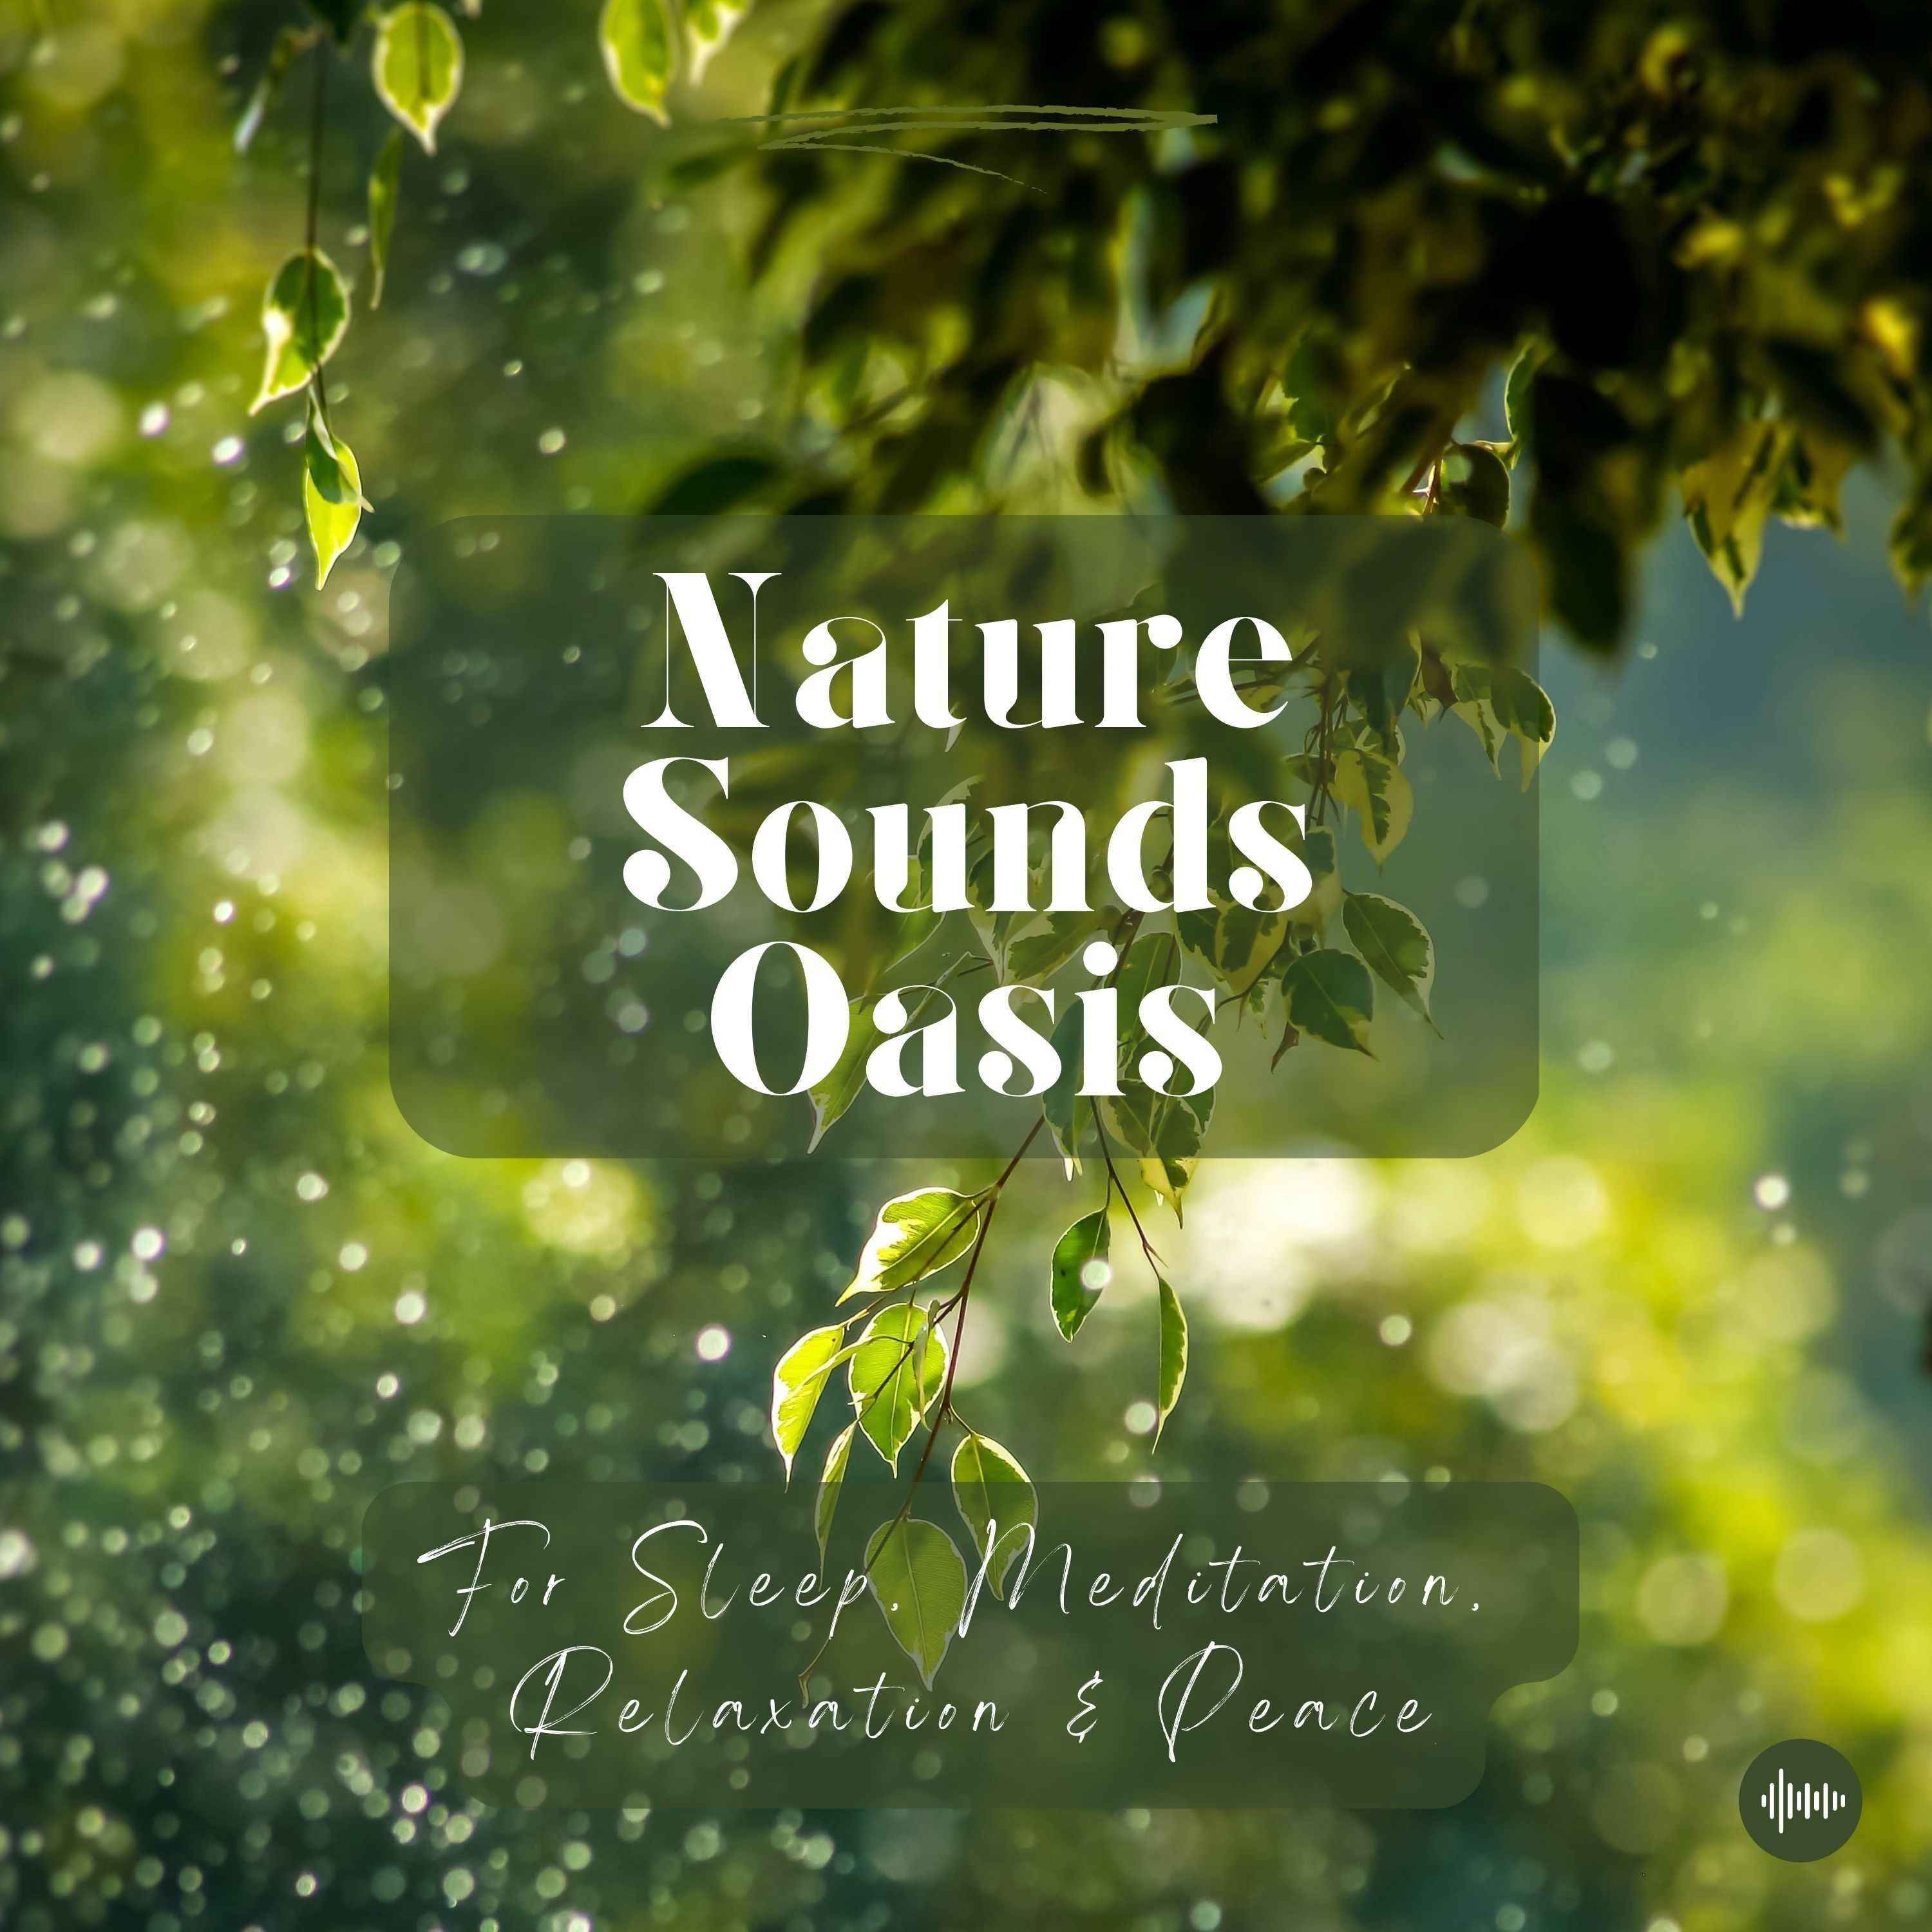 Meadow Serenade With Relaxing Music, Rustling Leaves & Nature Sounds For Sleep, Meditation, Relaxation Or Focus | Piano, Sleep Music, Sleep Sounds, Study Music, Birds, Zen, White Noise For Sleep